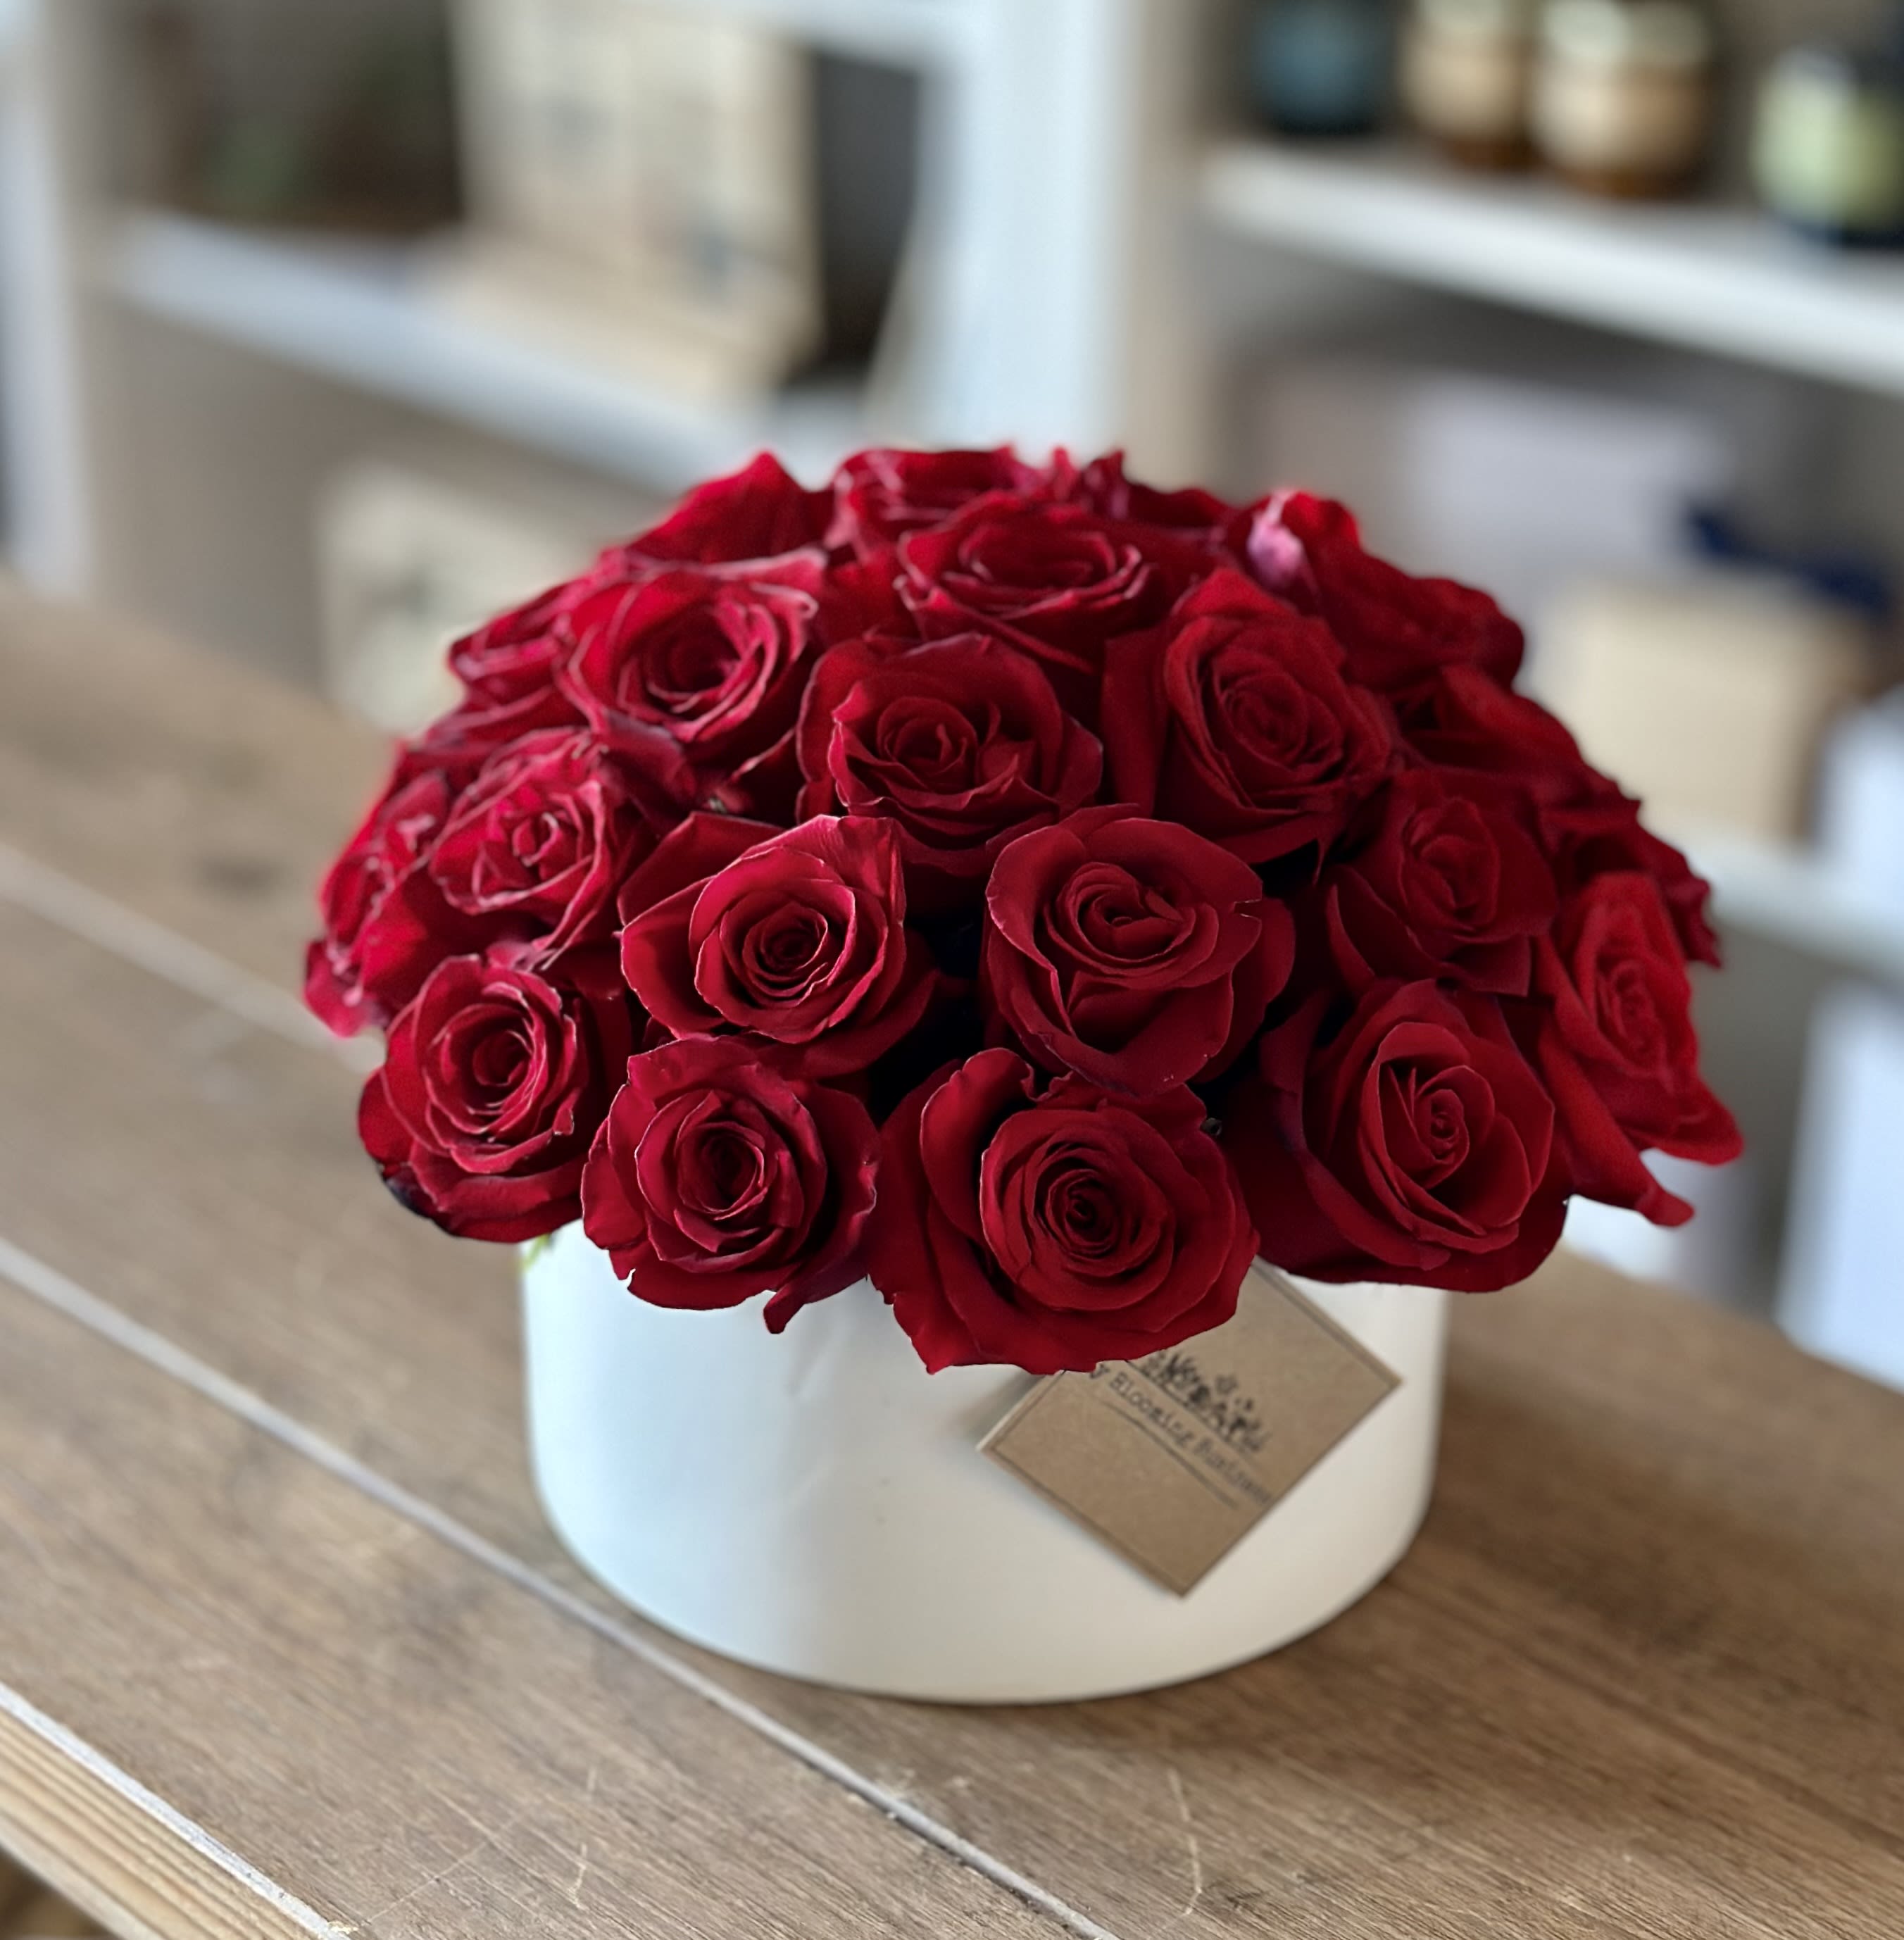 Best of my Love - &quot;Best of my Love&quot; arrangement like the famous song by the Emotions. Has 30 Red Roses in a white ceramic cylinder vase. This is the perfect arrangement to send to make them smile with glee, and show them love and affection with Best of my Love. 